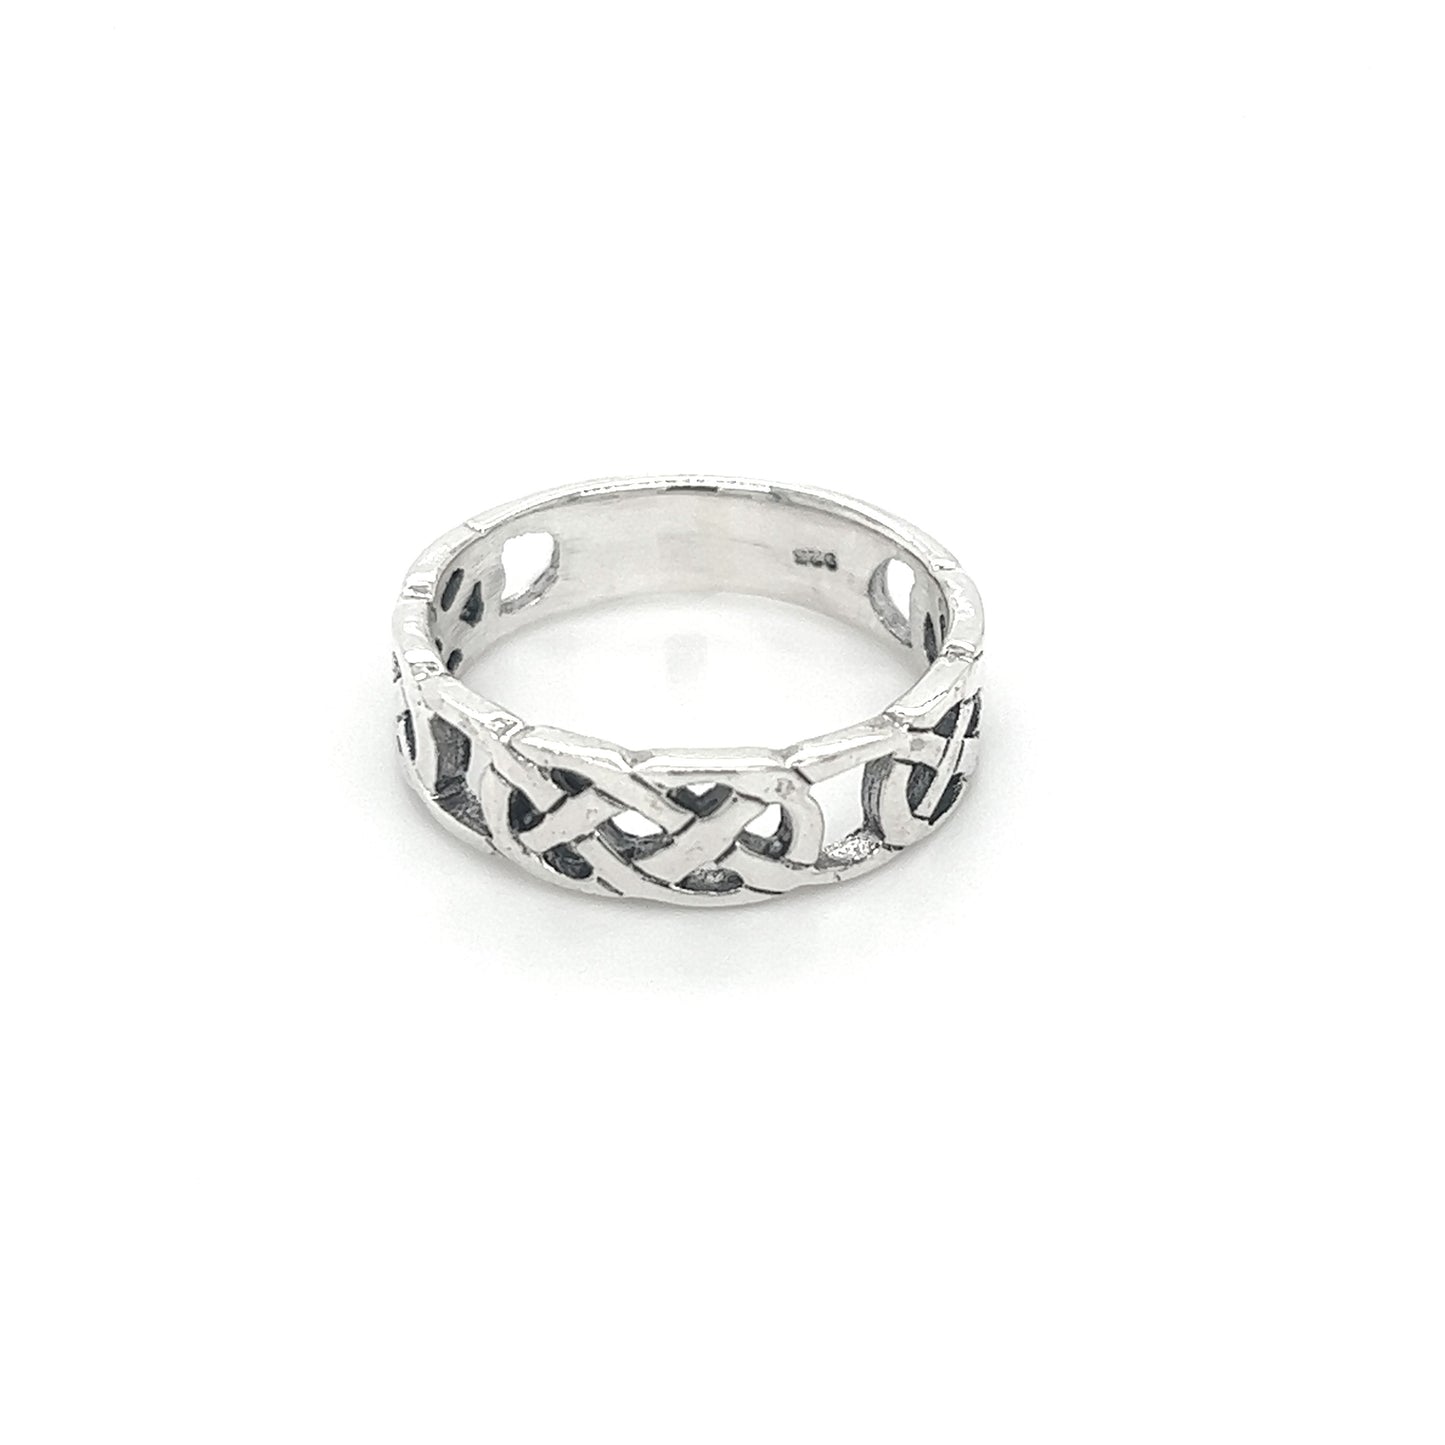 A sterling silver 5mm Celtic Knot Band, perfect for those who appreciate cultural jewelry.